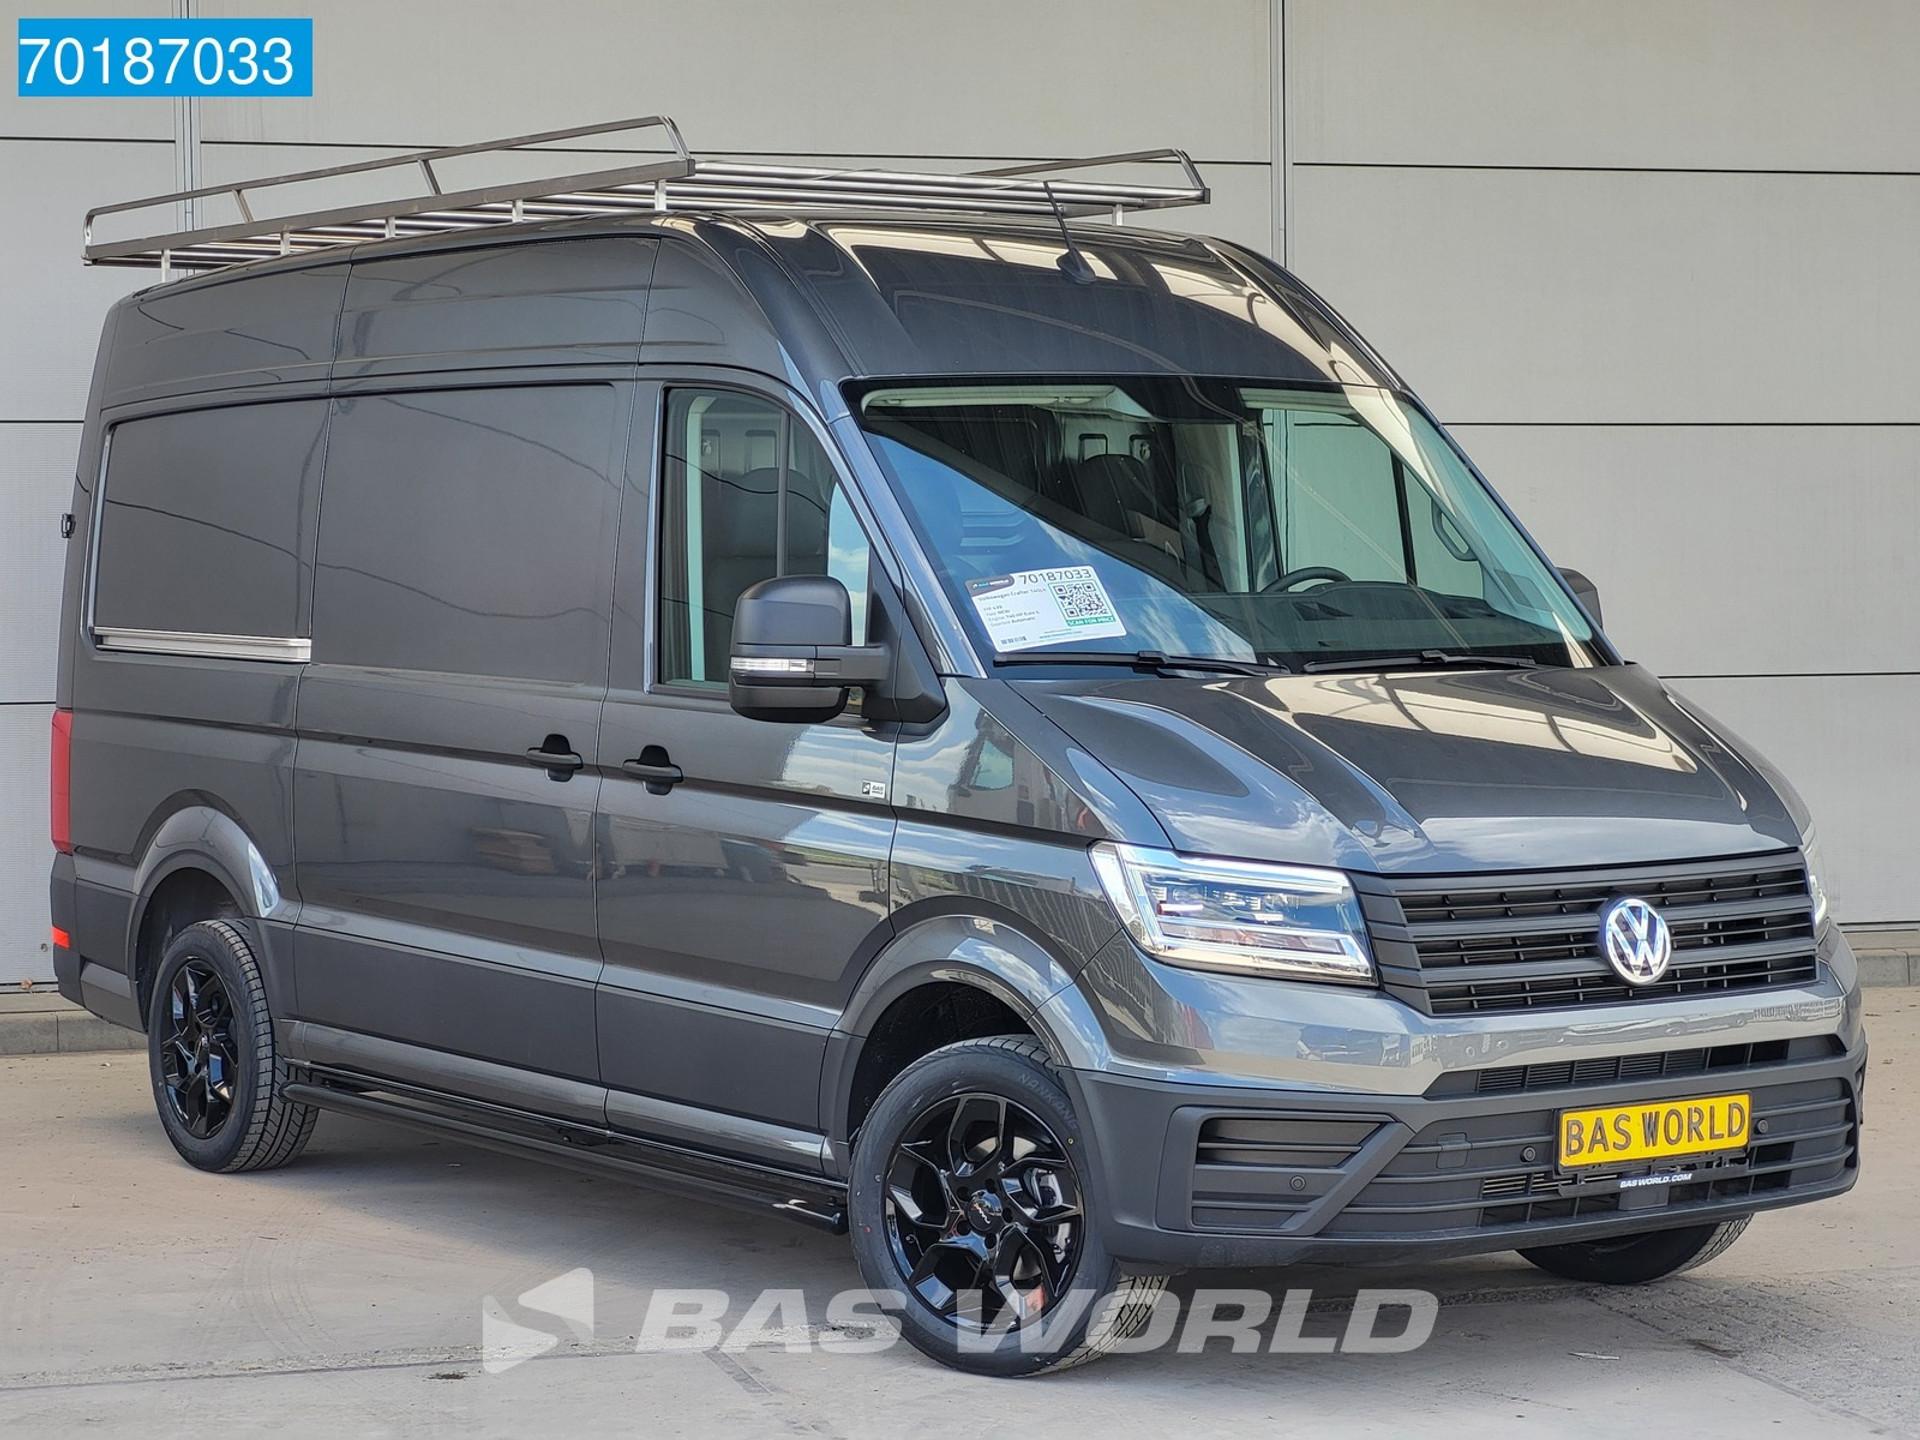 Foto 2 van Volkswagen Crafter 140pk Automaat L3H3 Imperiaal 18''Velgen Sidebars ACC LED Airco Cruise L2H2 11m3 Airco